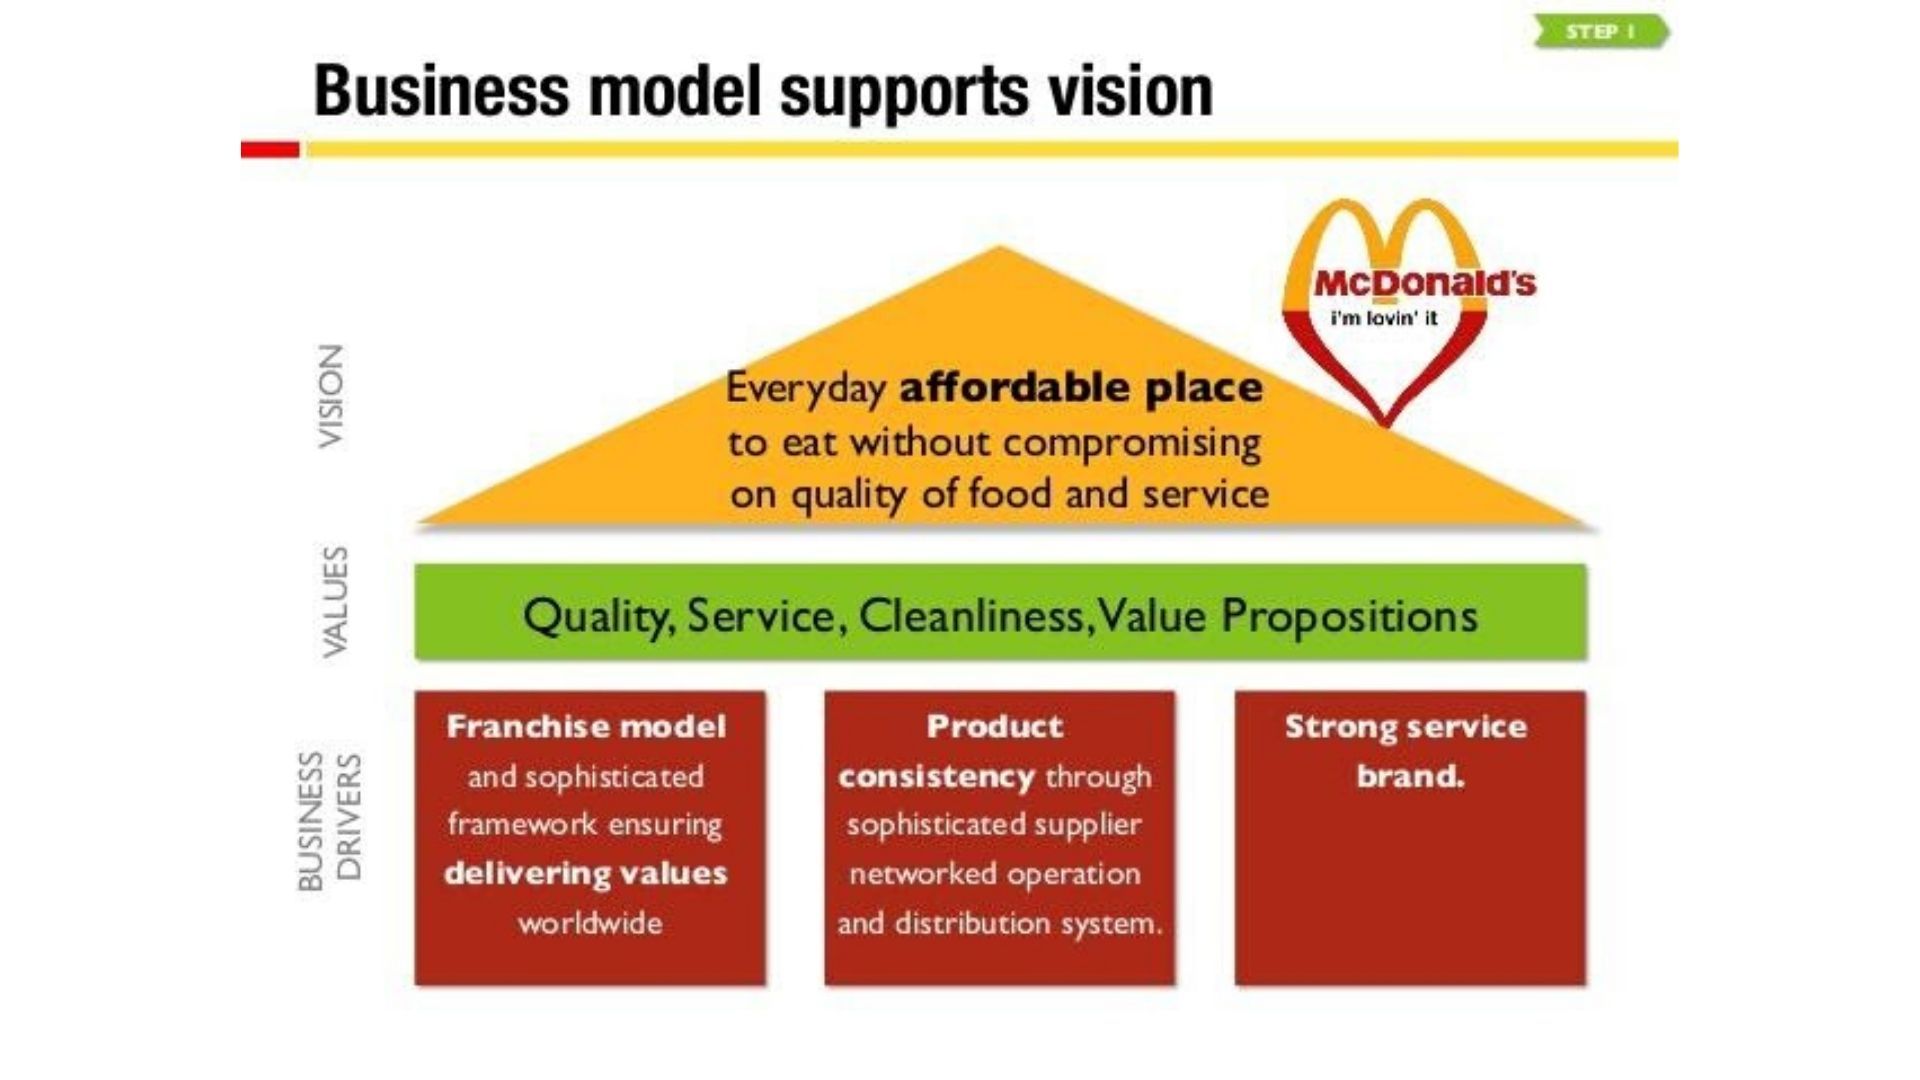 what is the business model of mcdonald